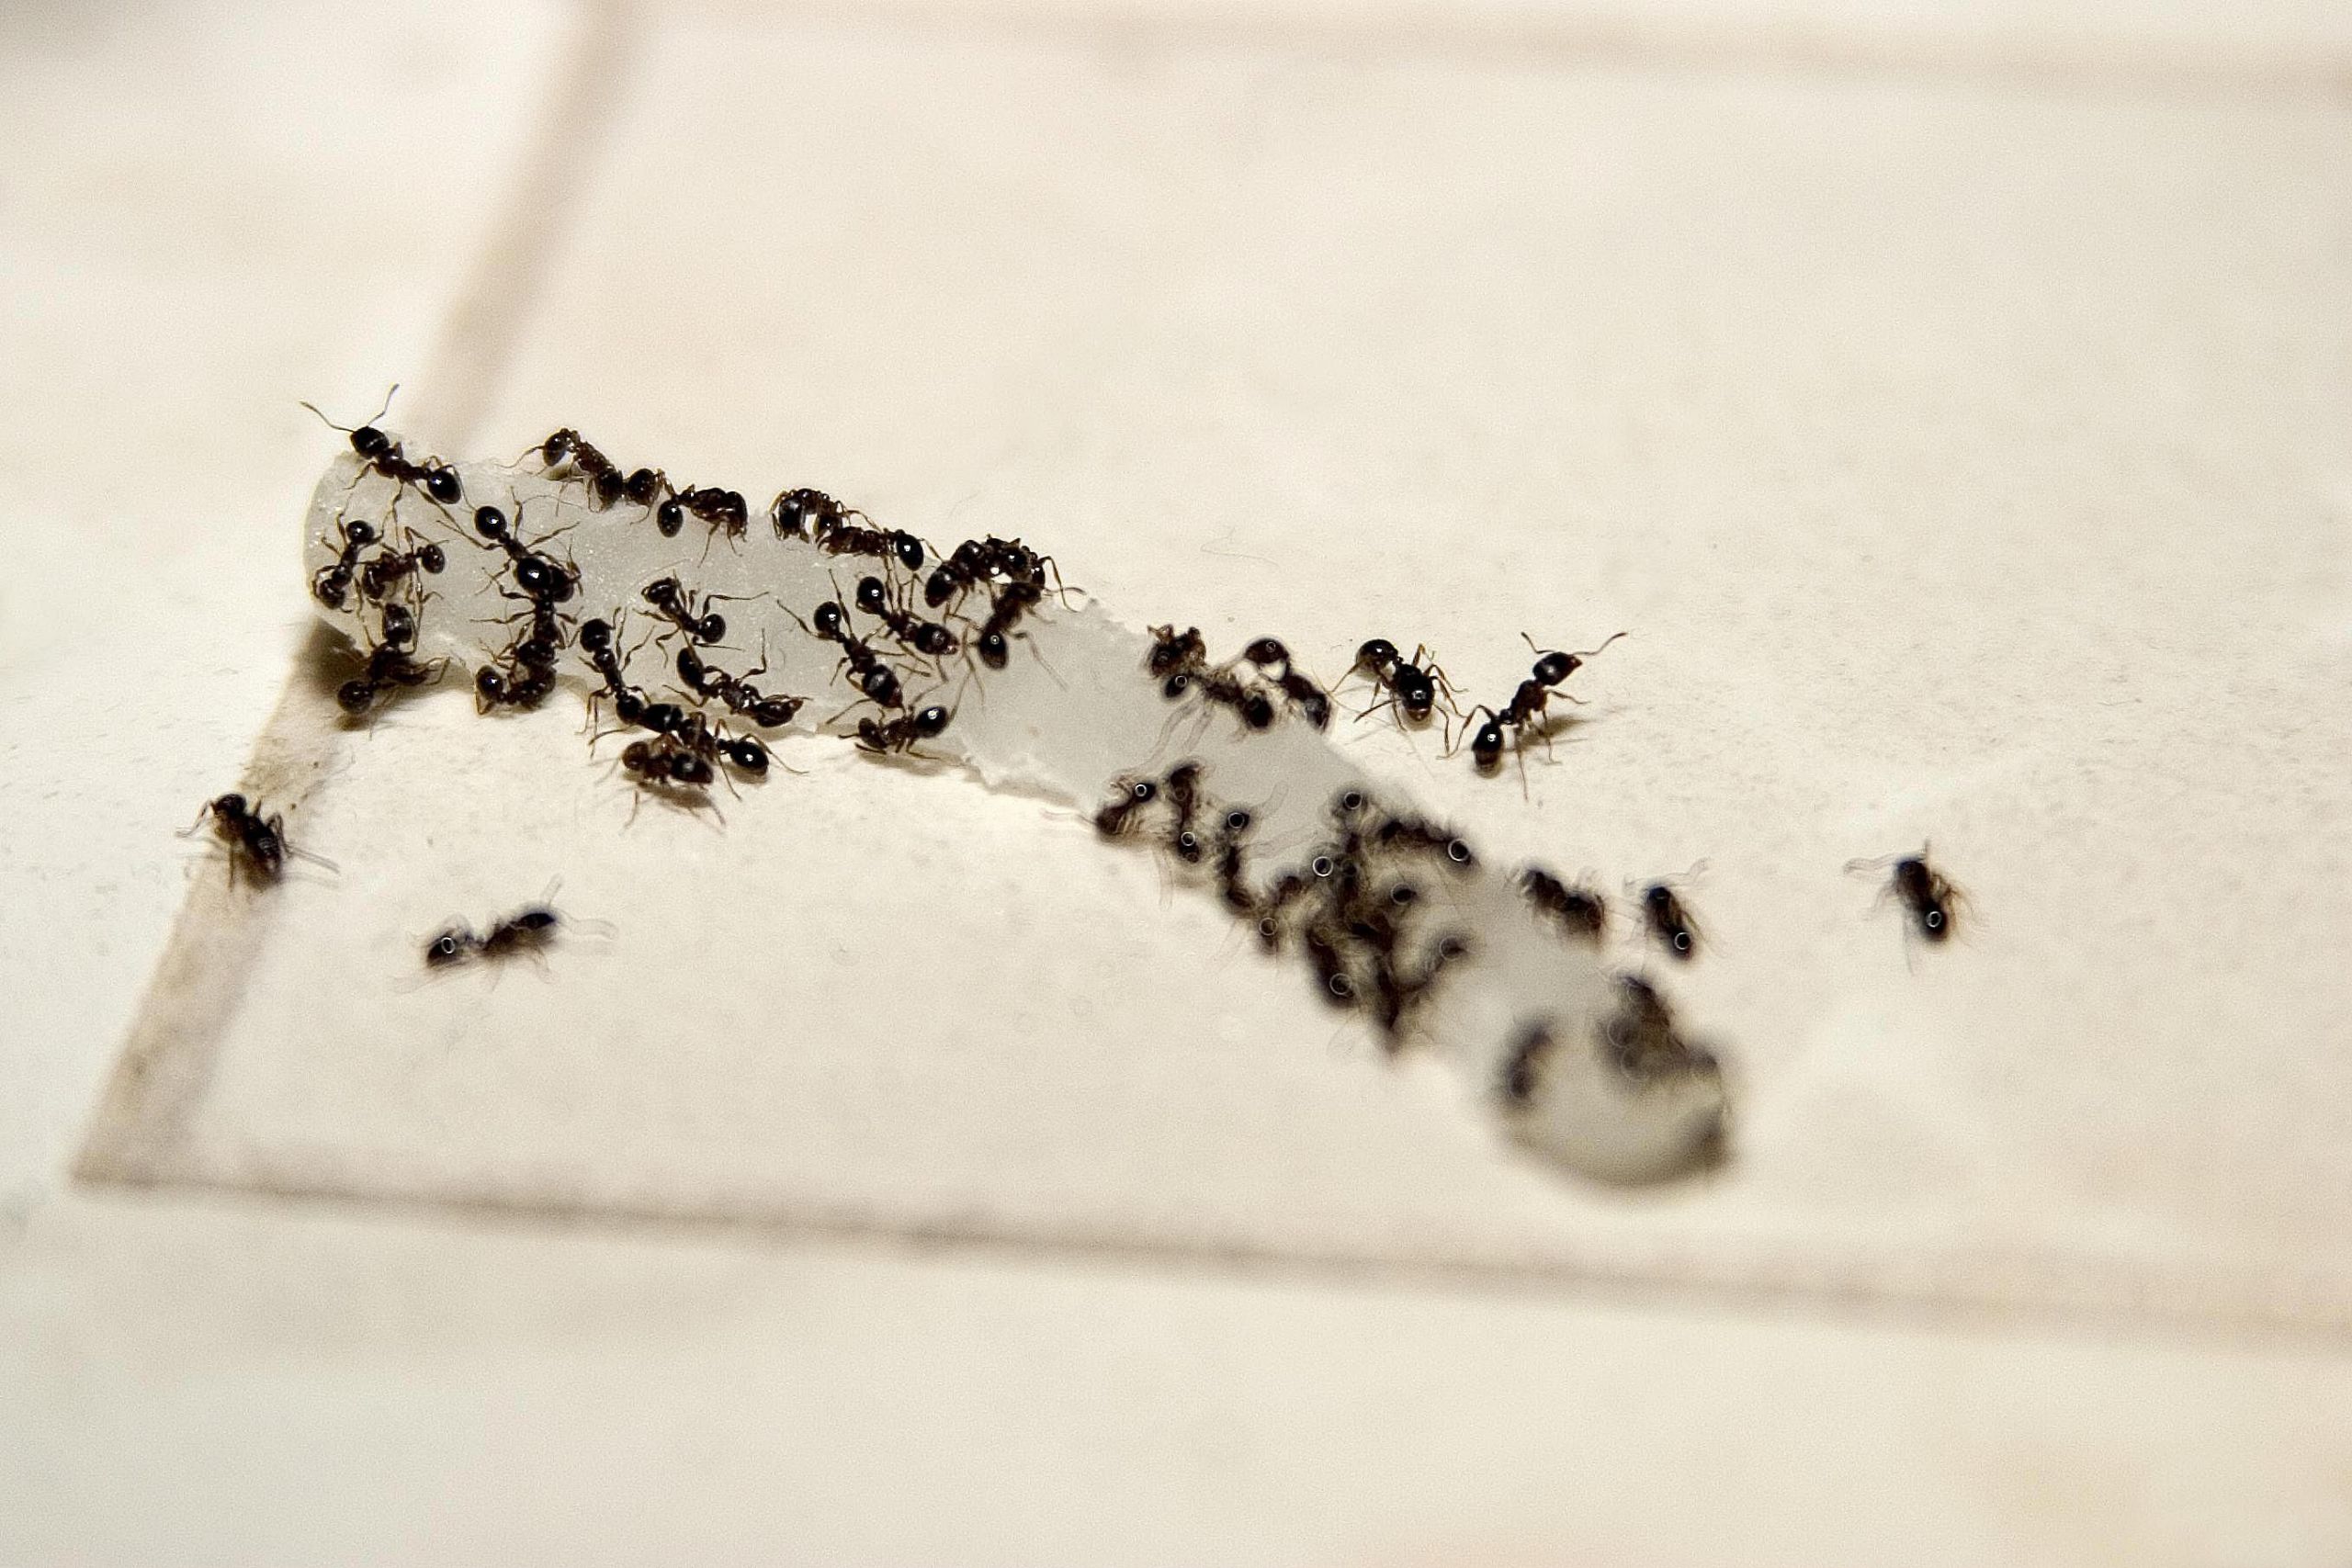 Small Ants In Kitchen
 How to Get Rid of Stinky Odorous House Ants